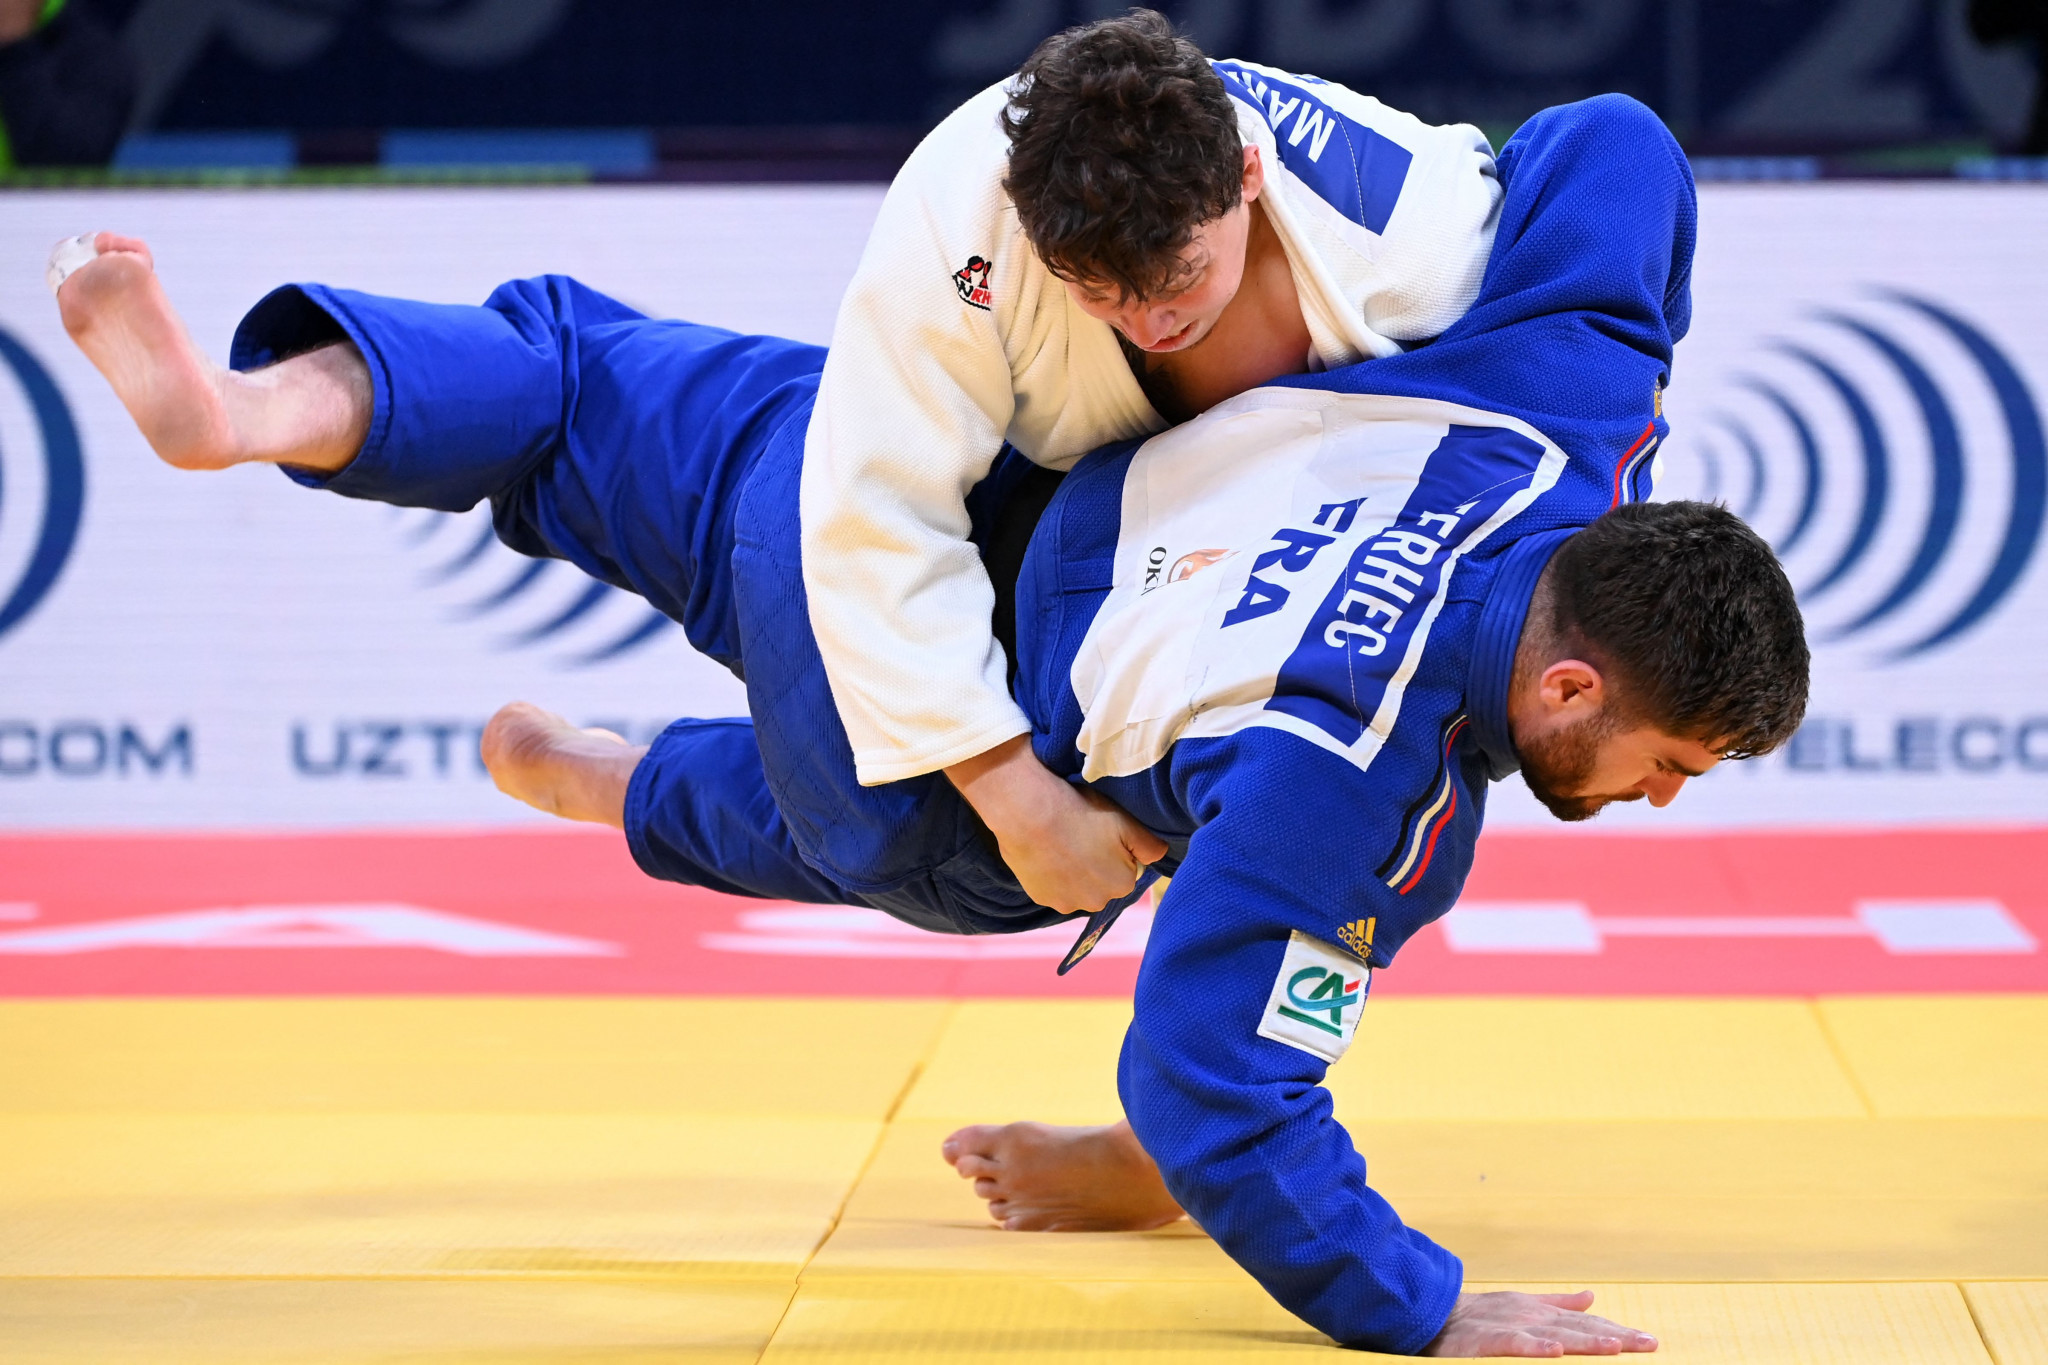 France Judo changes men's head coach after poor results at World Championships